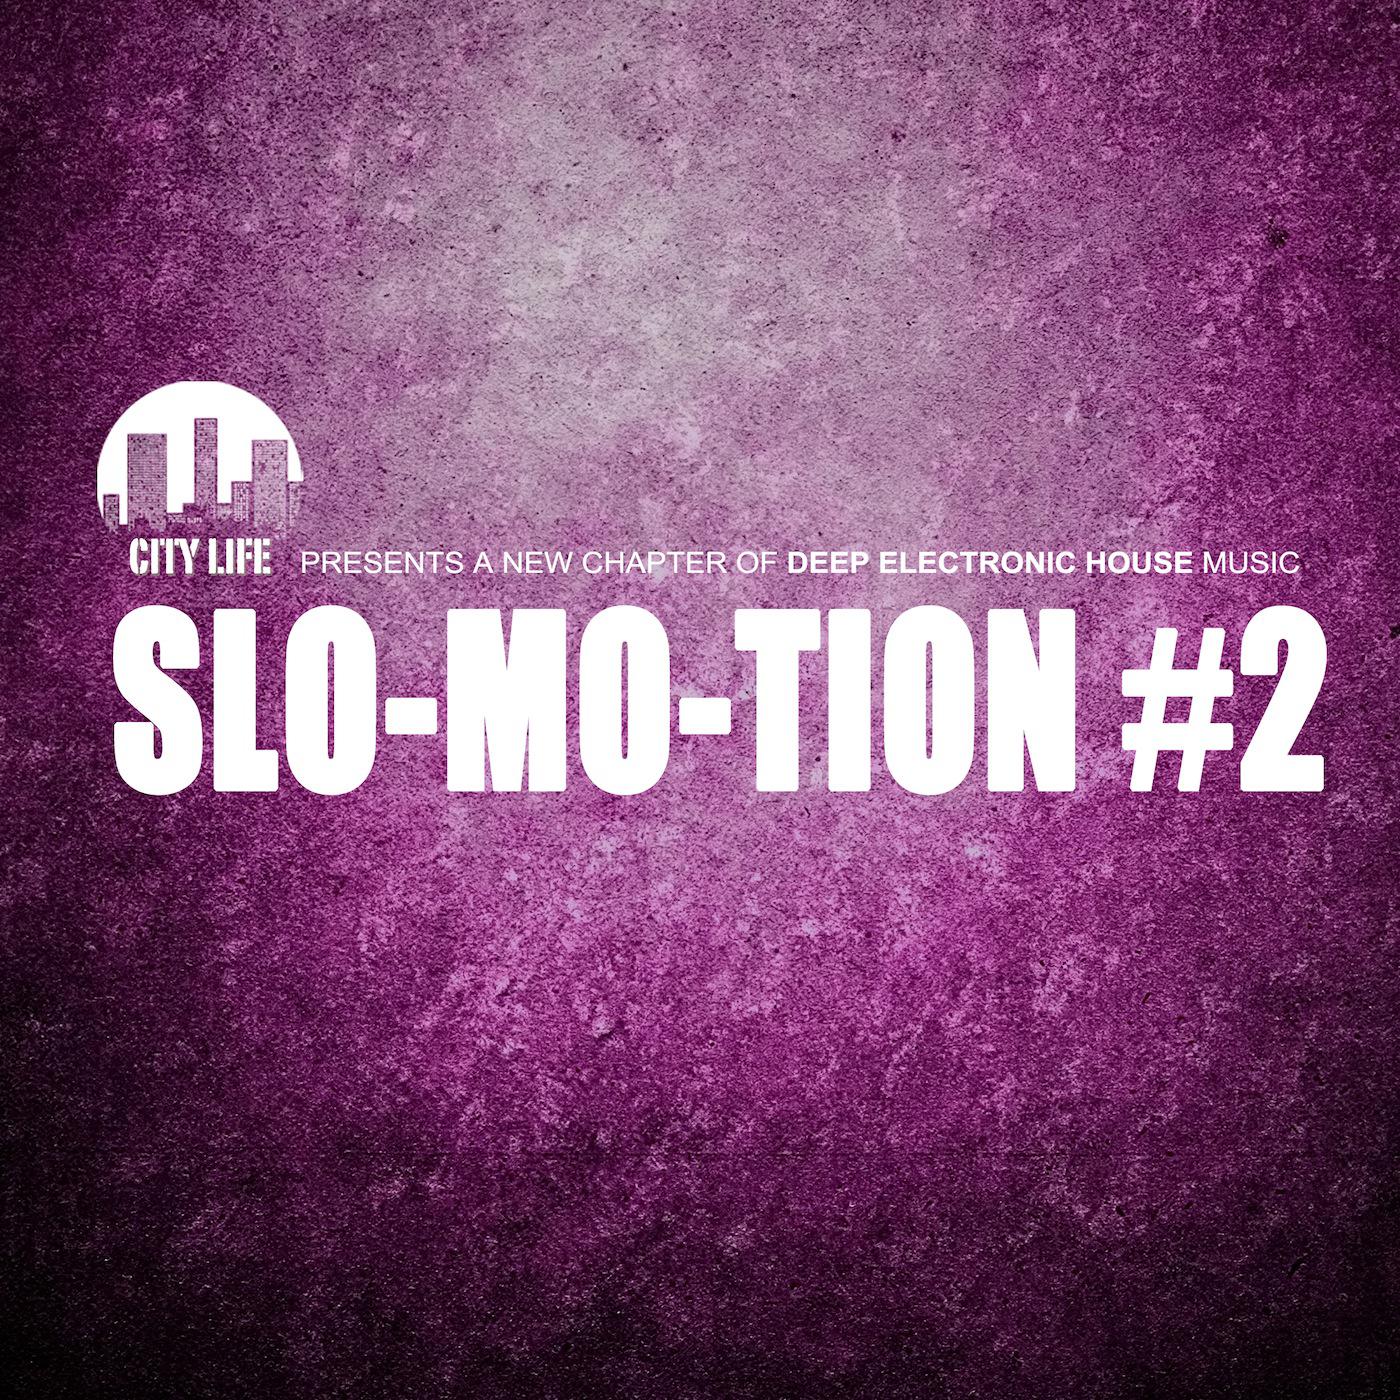 Slo-Mo-Tion #2 - A New Chapter of Deep Electronic House Music